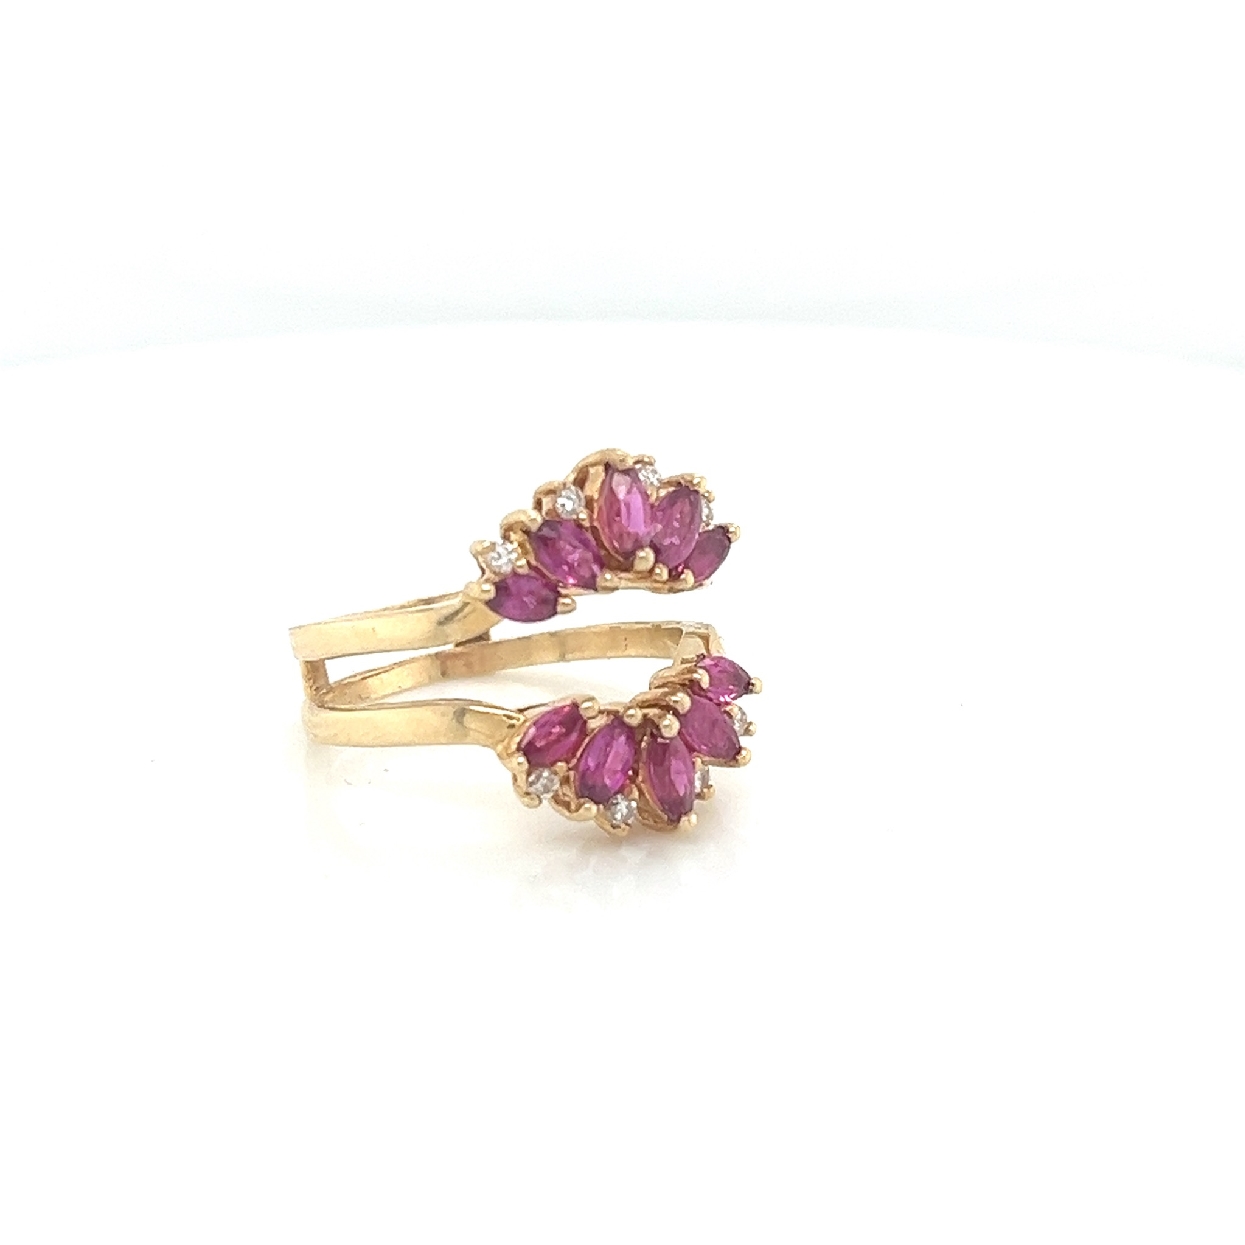 14k Yelllow Gold Ring Jacket/ Enhancer Ruby with Diamond Accent size 7.25 